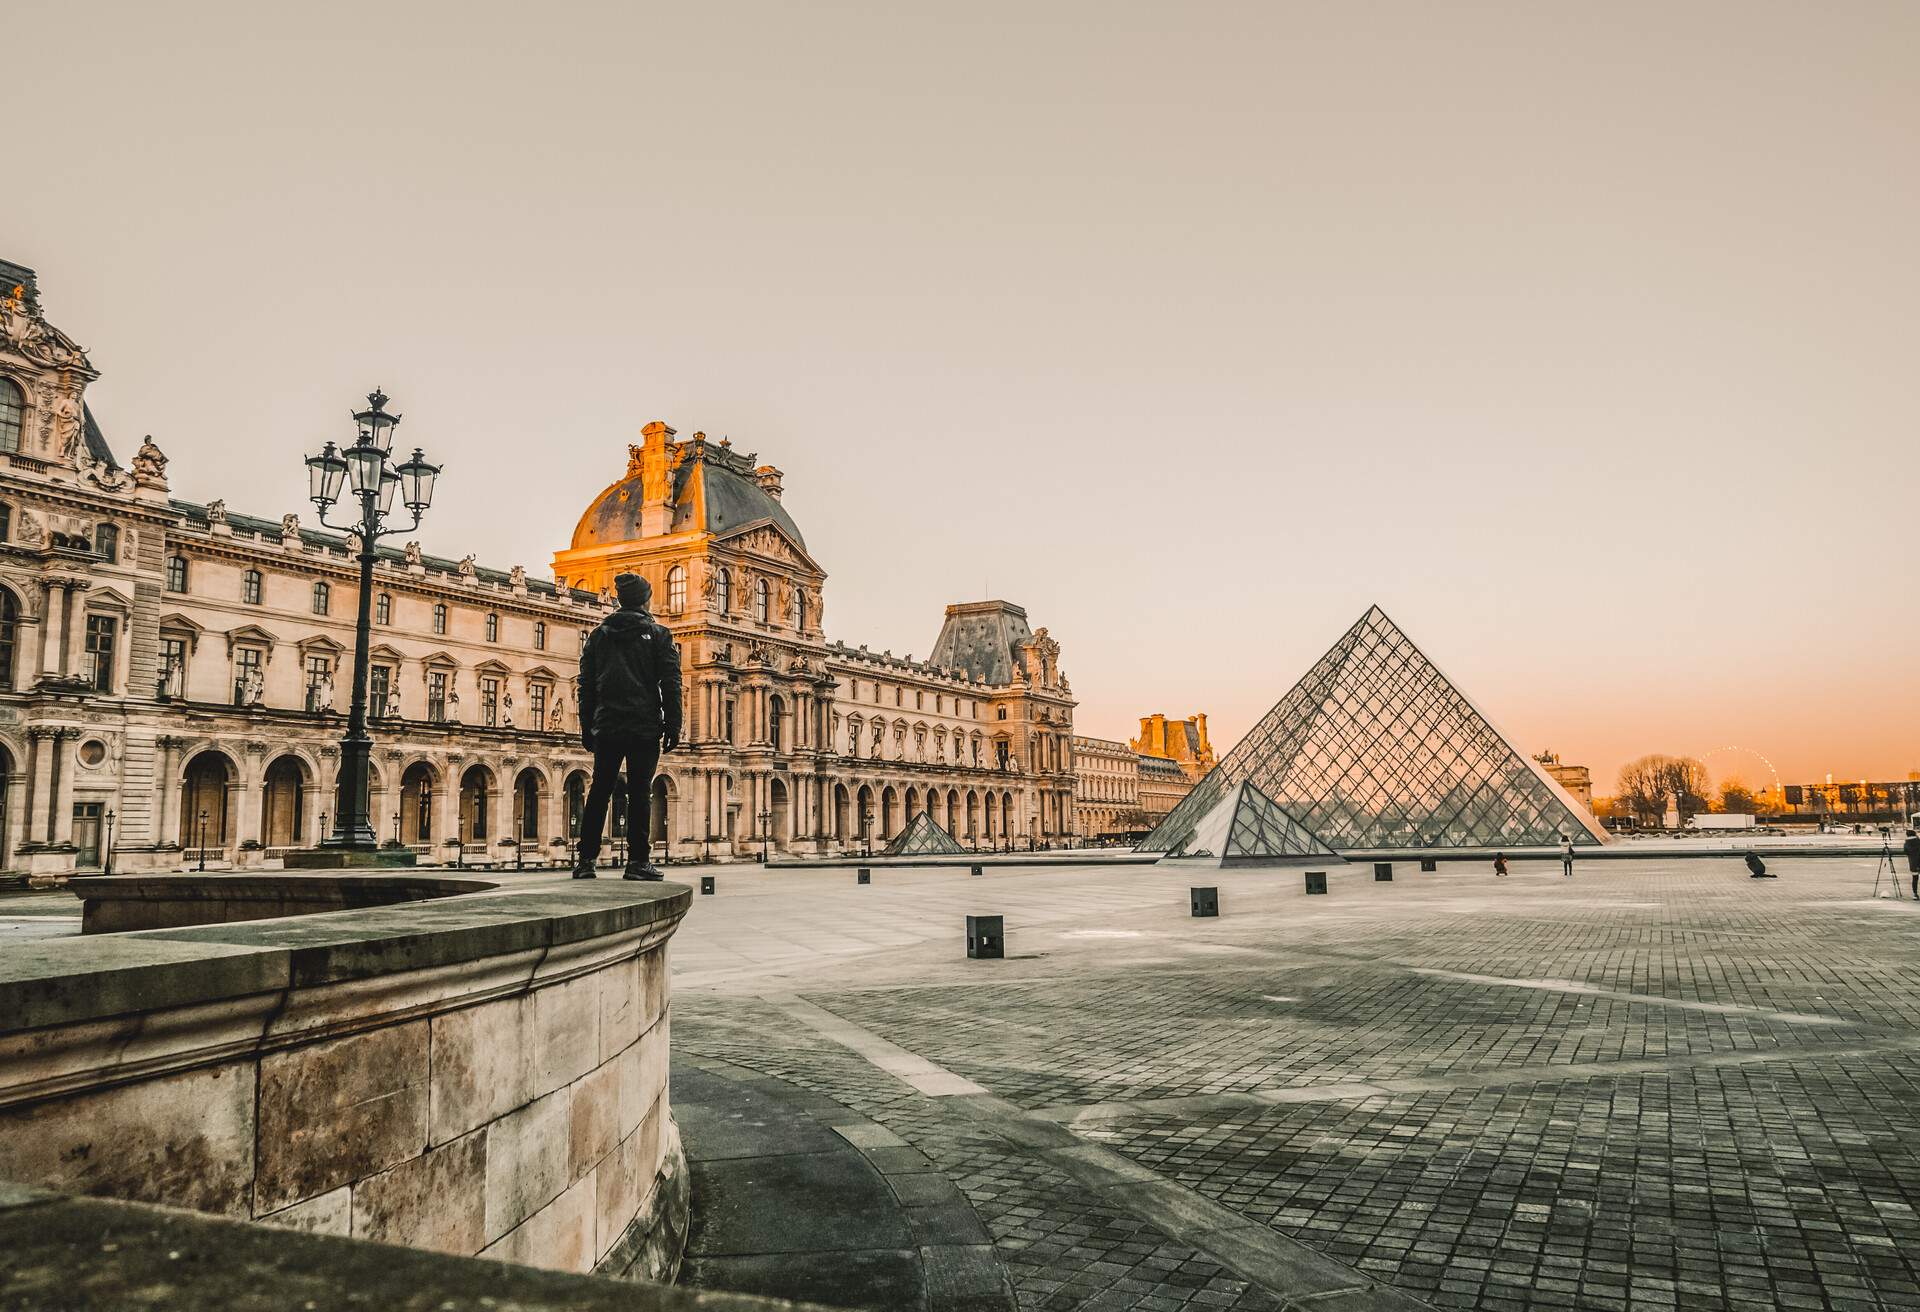 Man overlooking the glass pyramids of the Louvre Museum, Paris France